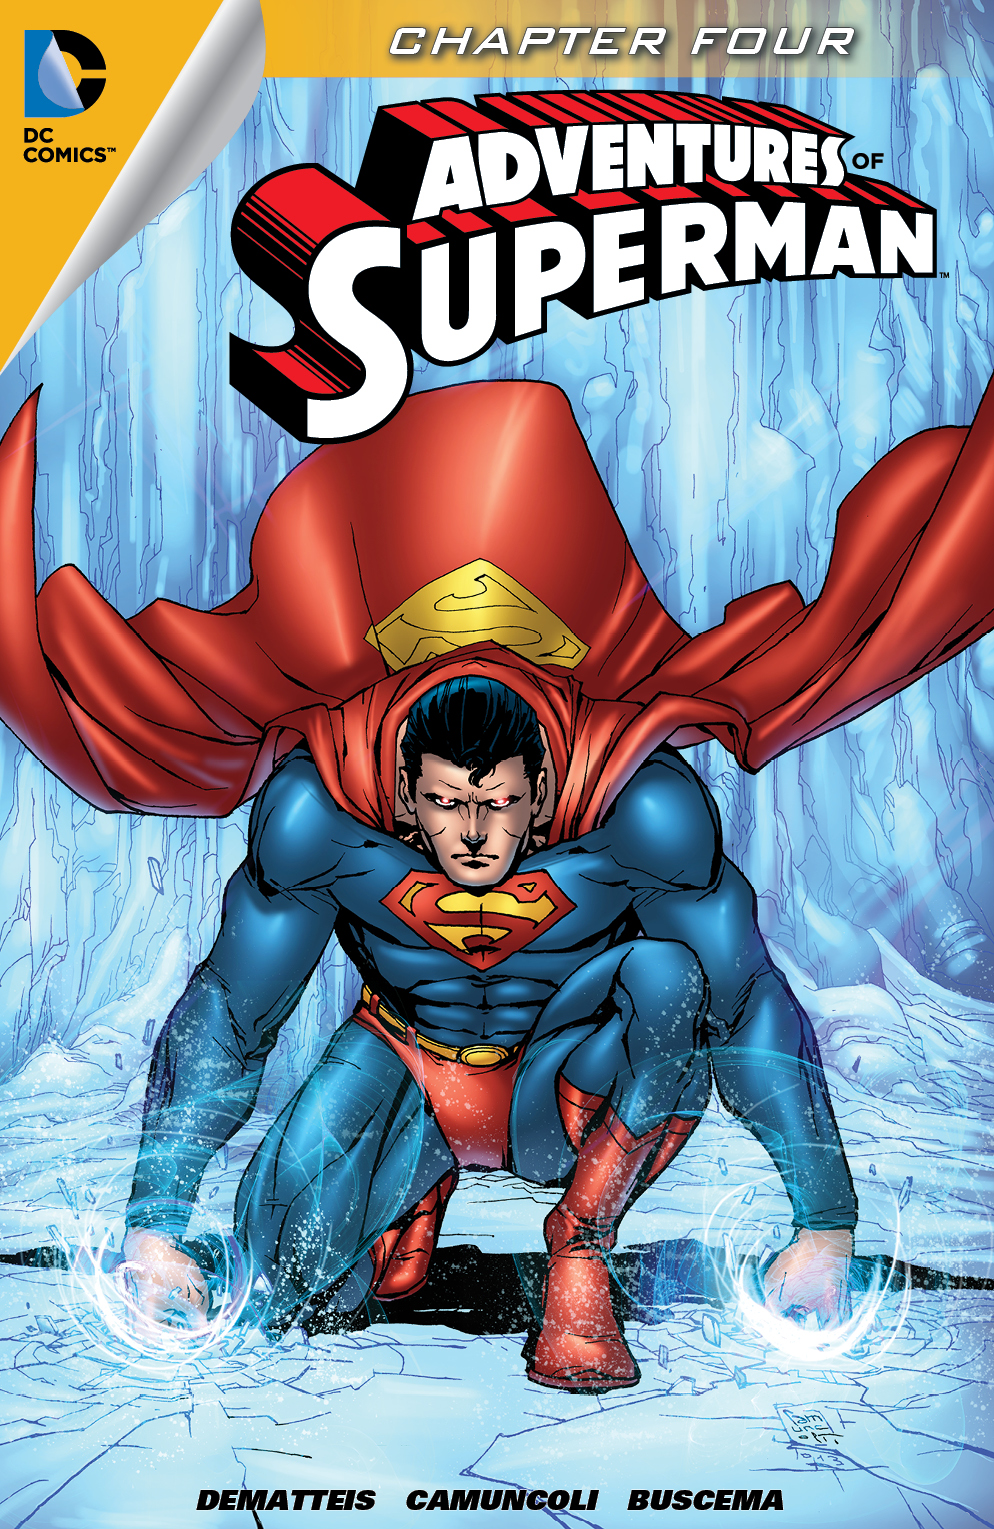 Adventures of Superman (2013-) #4 preview images